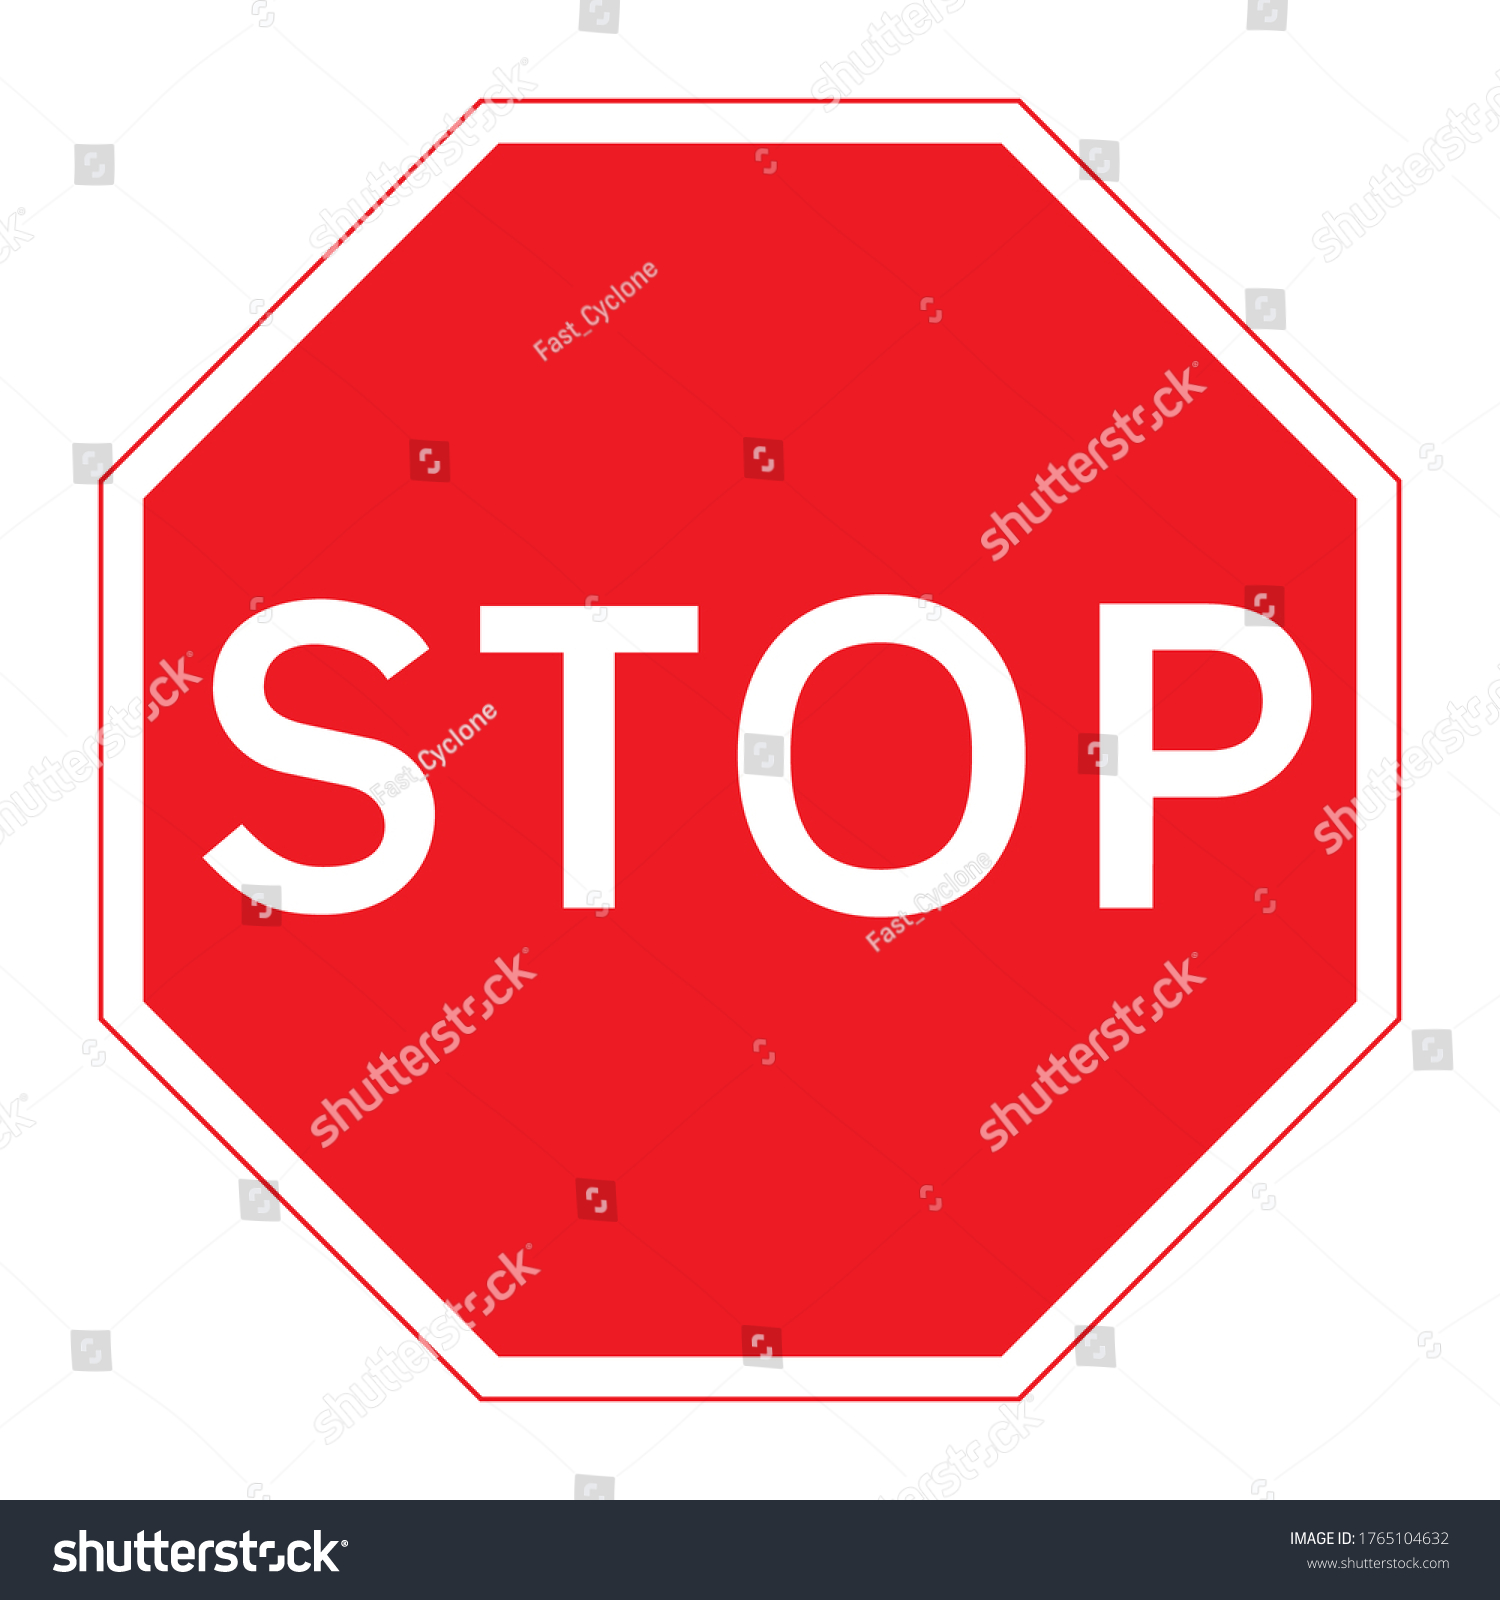 SVG of STOP road sign. Vector illustration of red octagon with white legend inside. Mandatory traffic sign. Absolute stop symbol for any purpose. svg